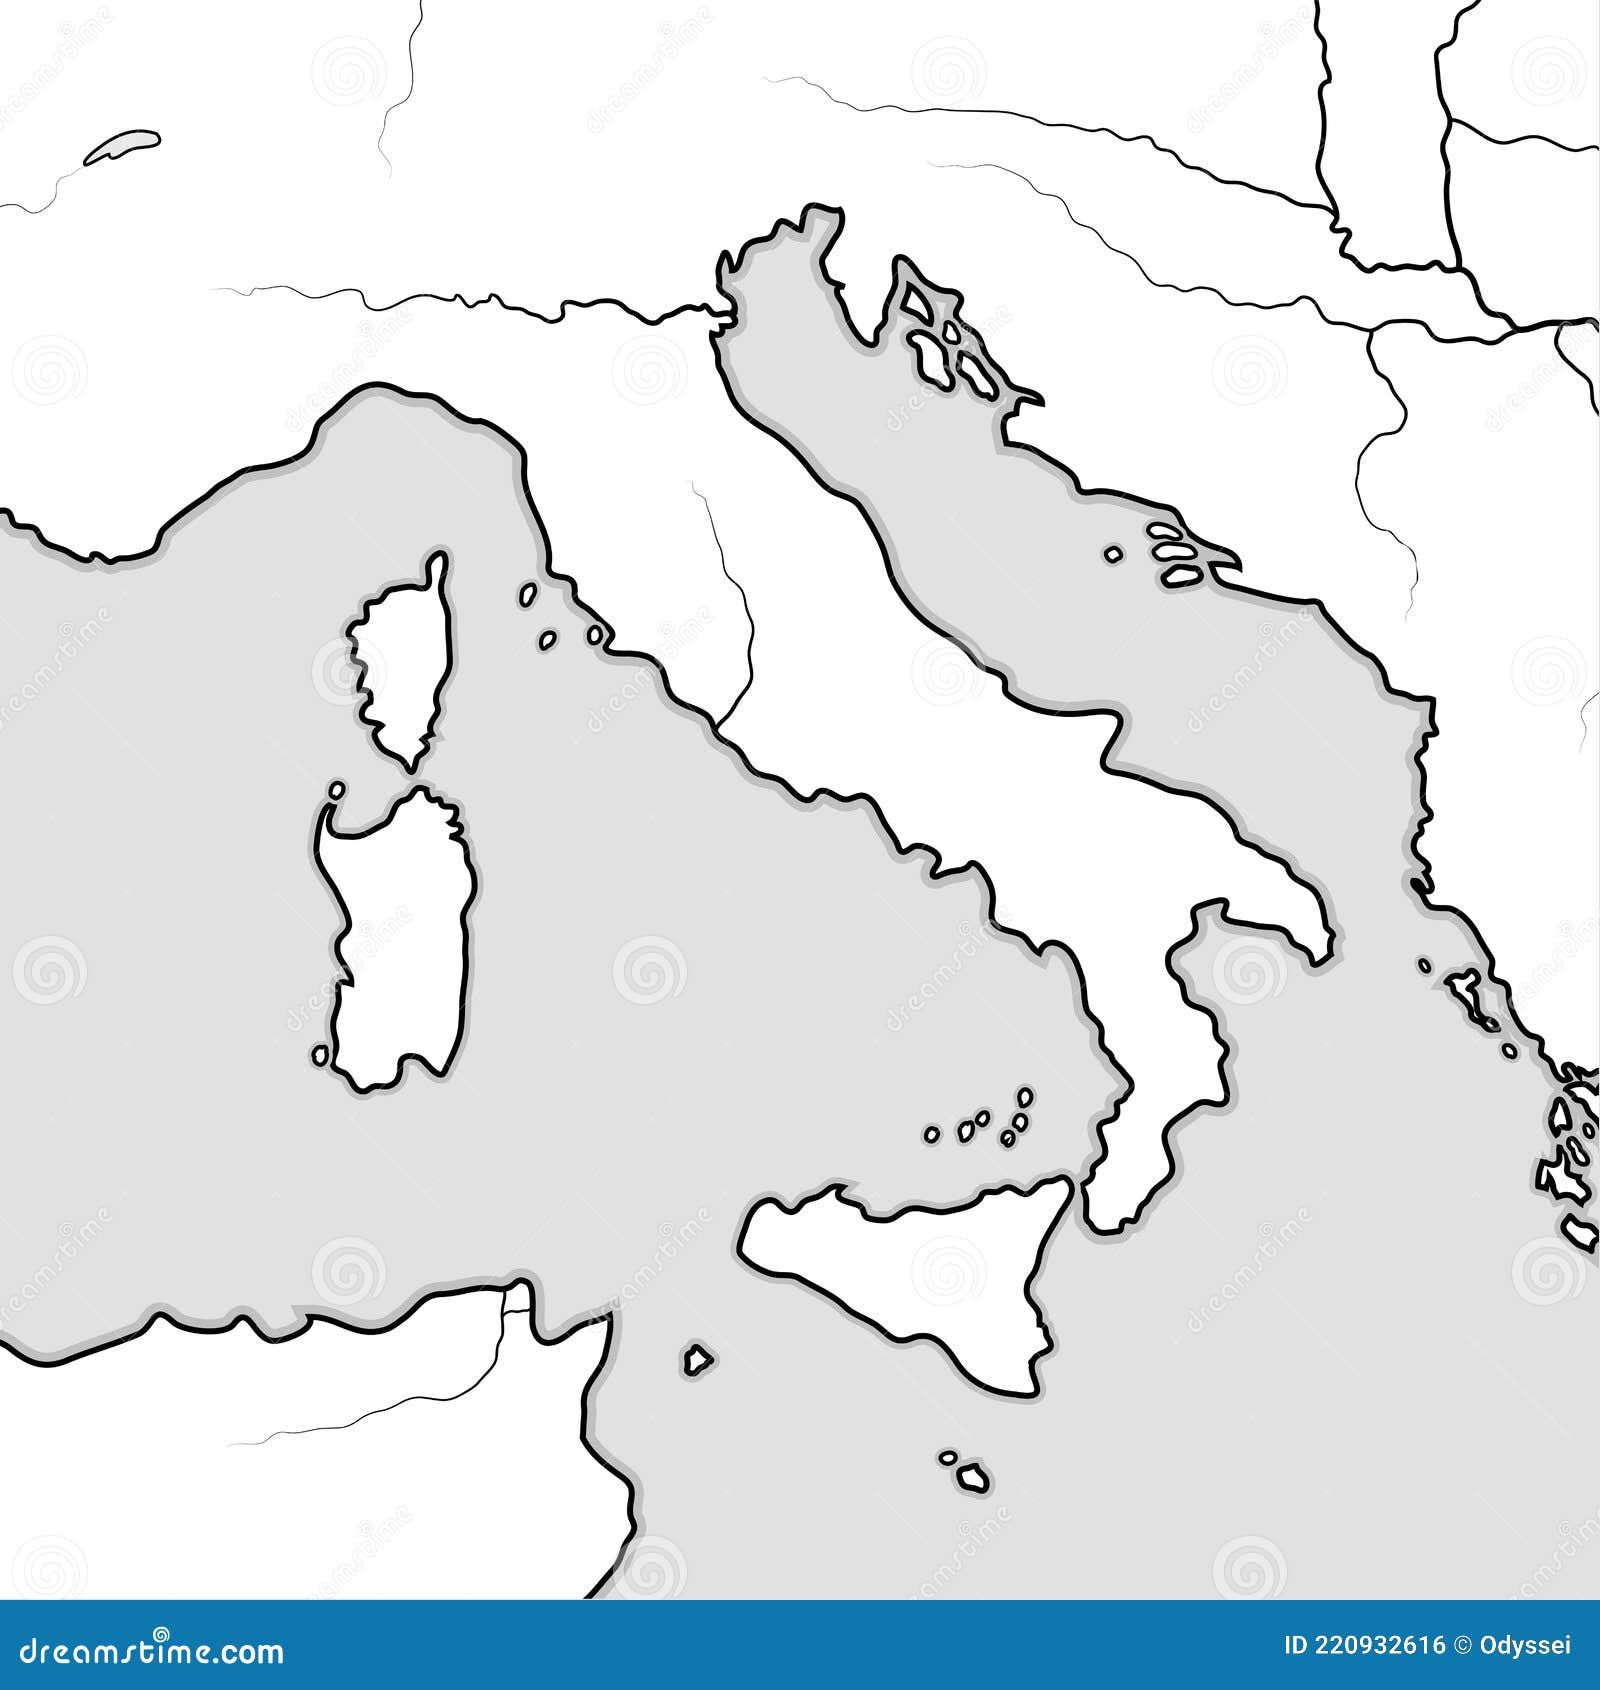 map of the italian lands: italy, tuscany, lombardy, sicily, the apennines, italian peninsula. geographic chart.